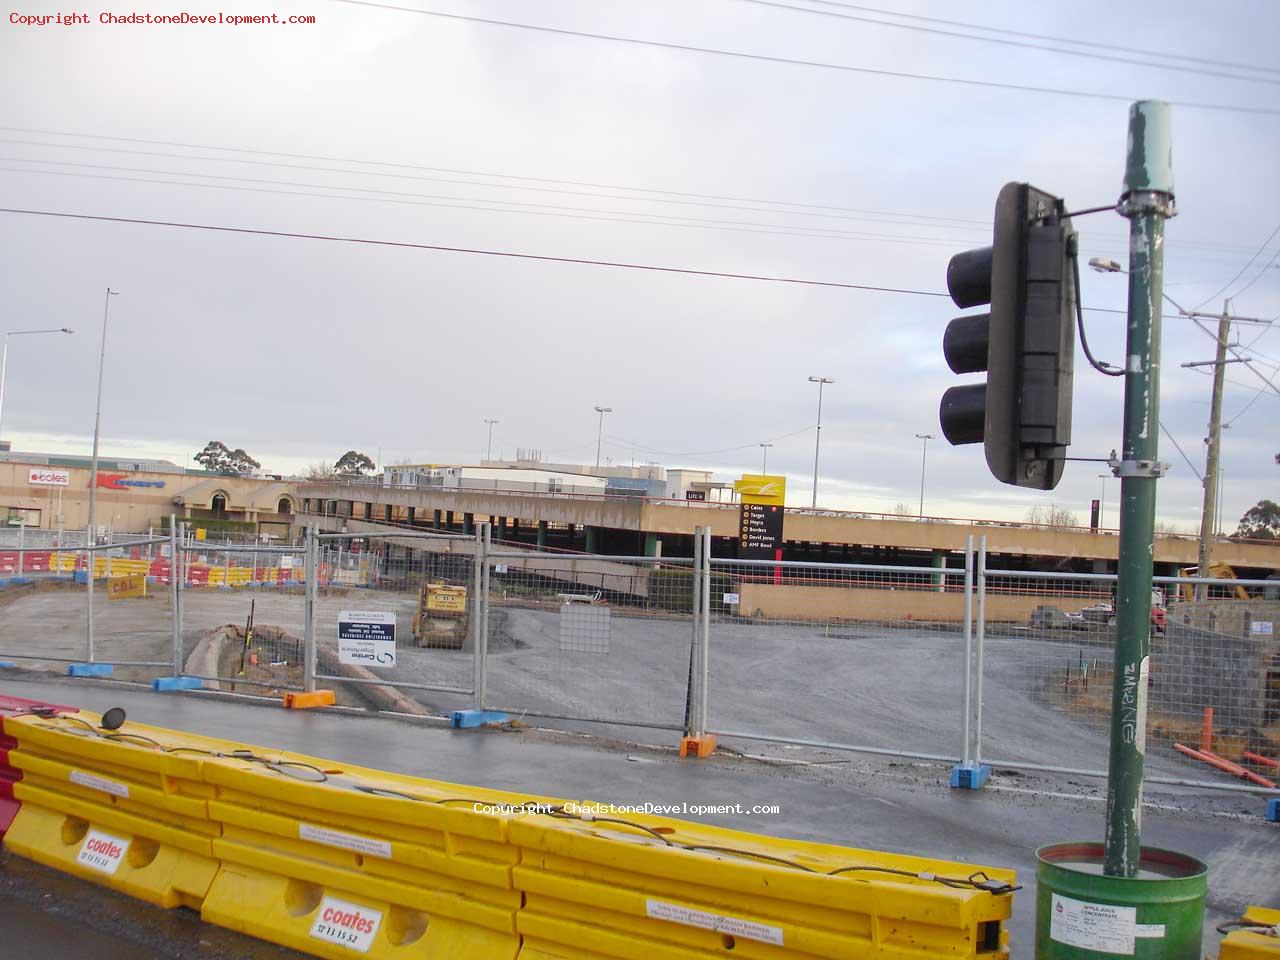 The new intersection under construction - Chadstone Development Discussions